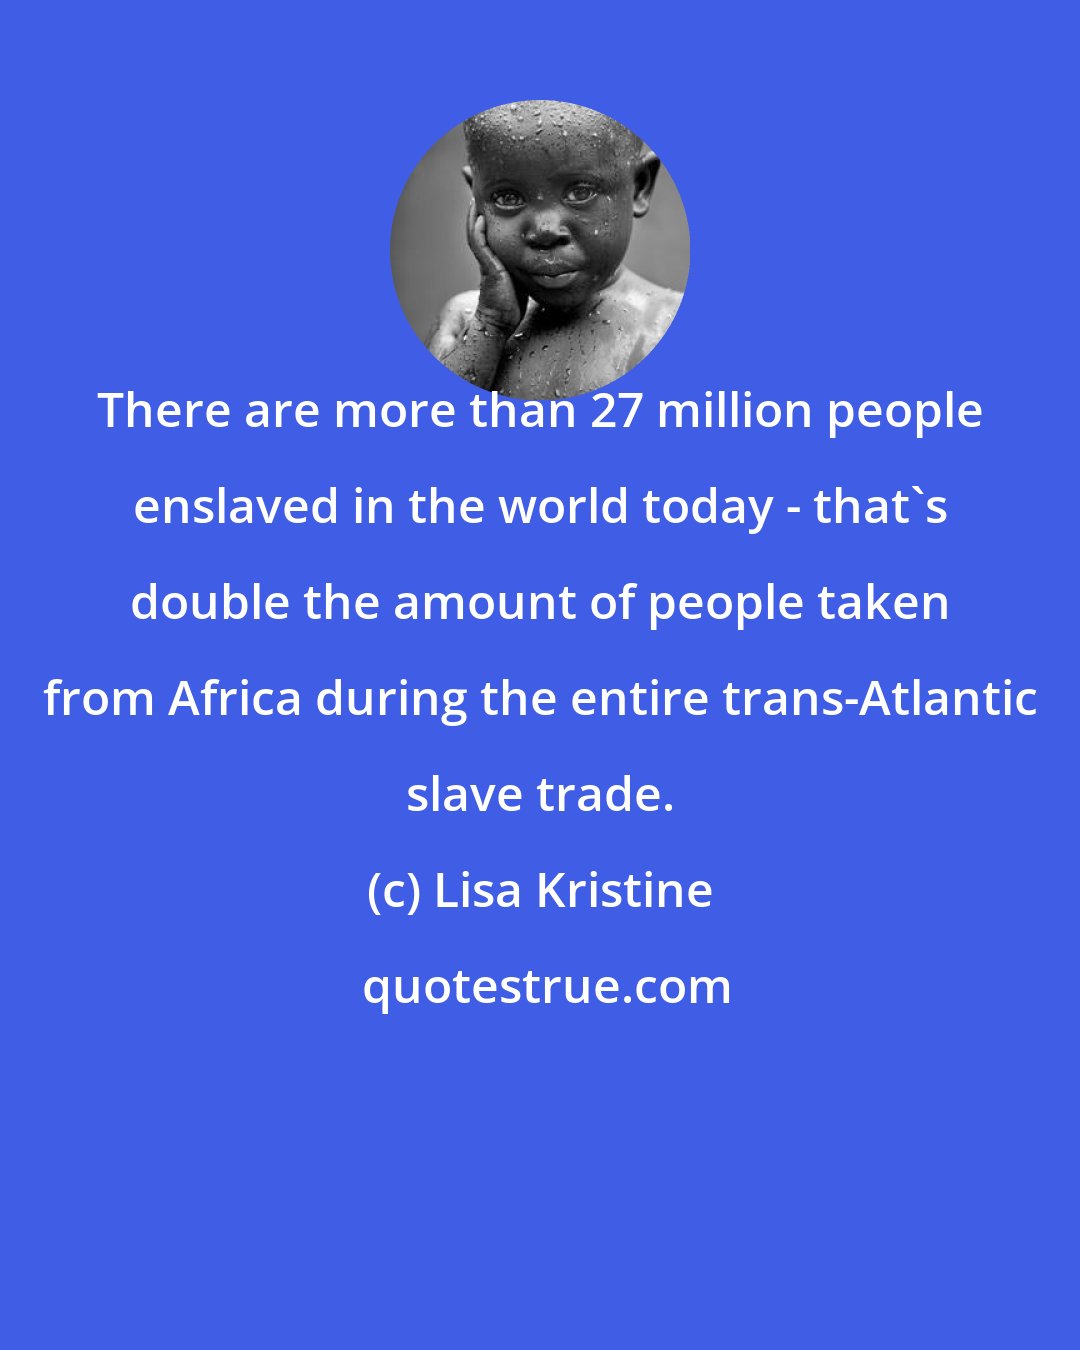 Lisa Kristine: There are more than 27 million people enslaved in the world today - that's double the amount of people taken from Africa during the entire trans-Atlantic slave trade.